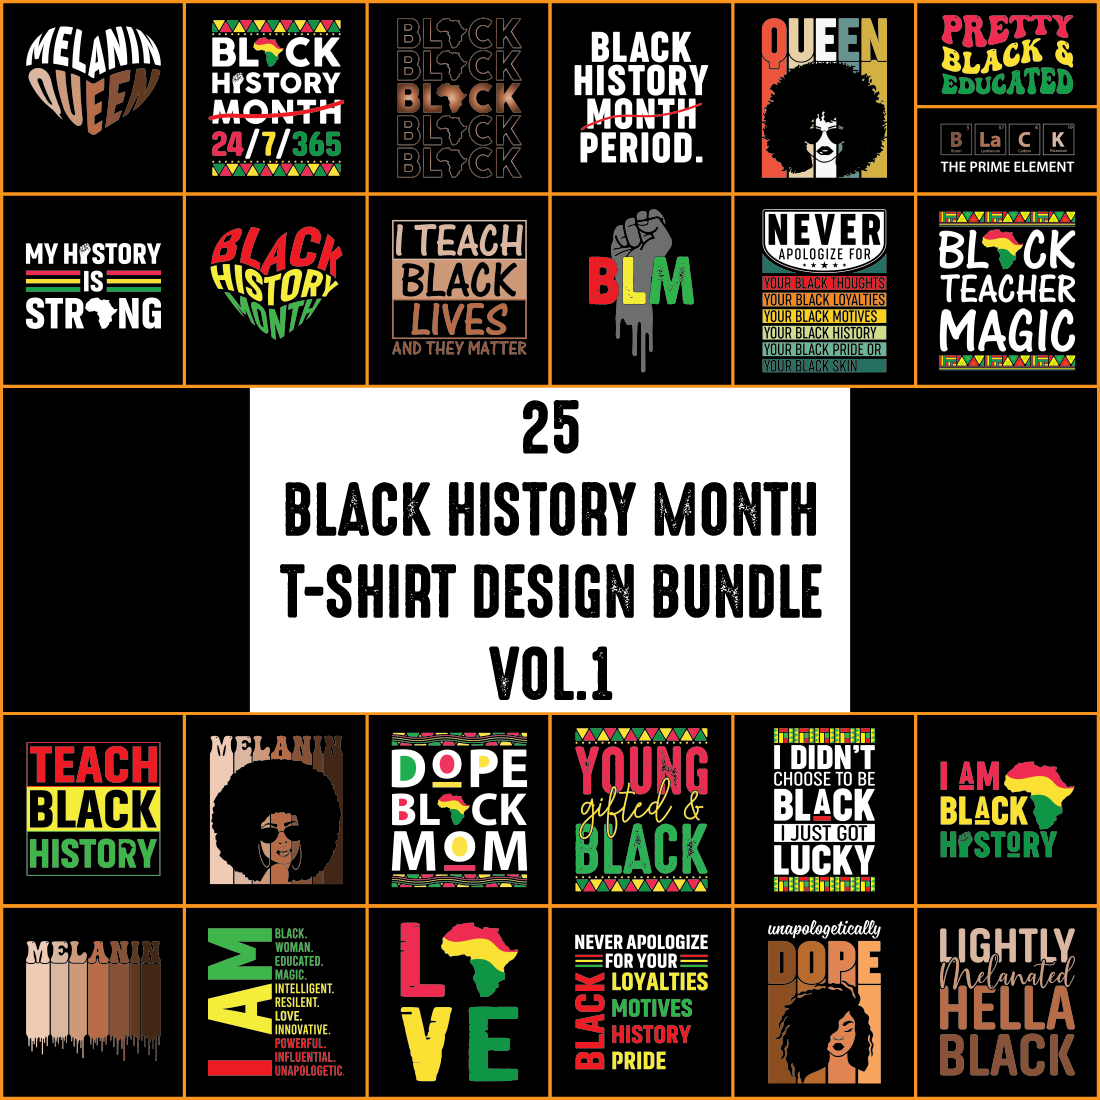 A collection of wonderful images for prints on the theme of Black History Month